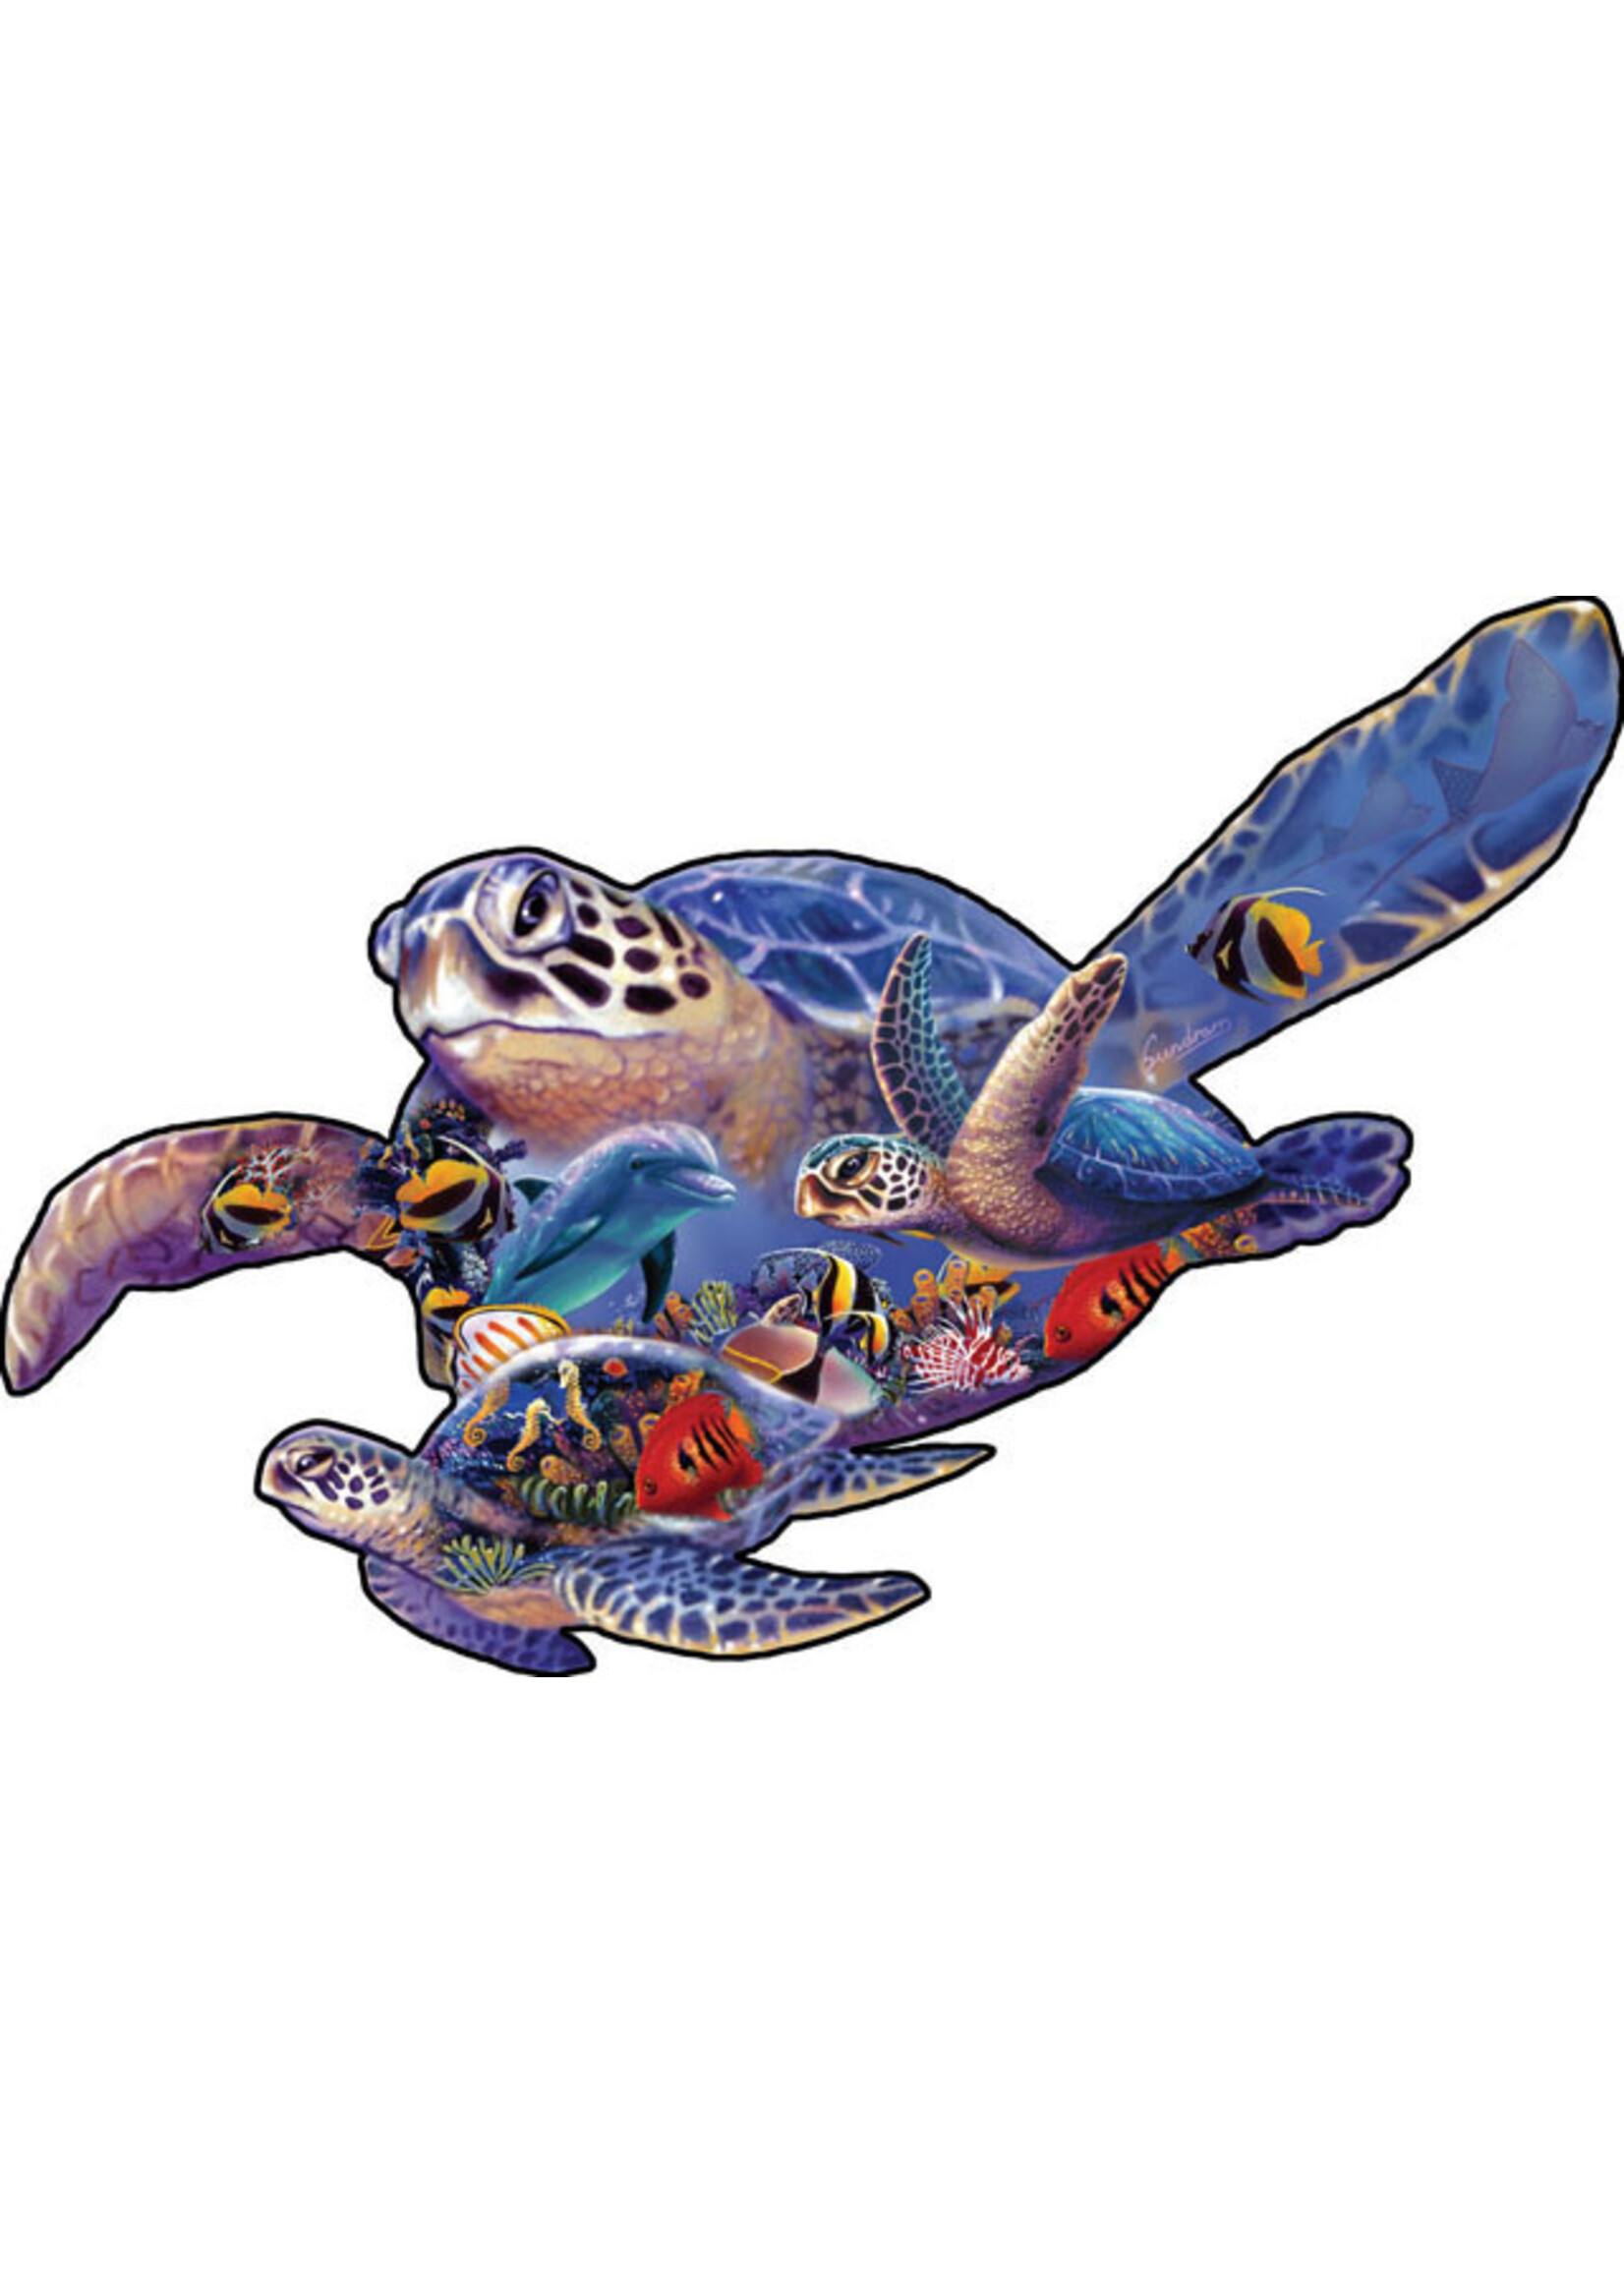 Sunsout Swimming Lesson (Sea Turtle) Special Shaped Puzzle 1000 Pieces